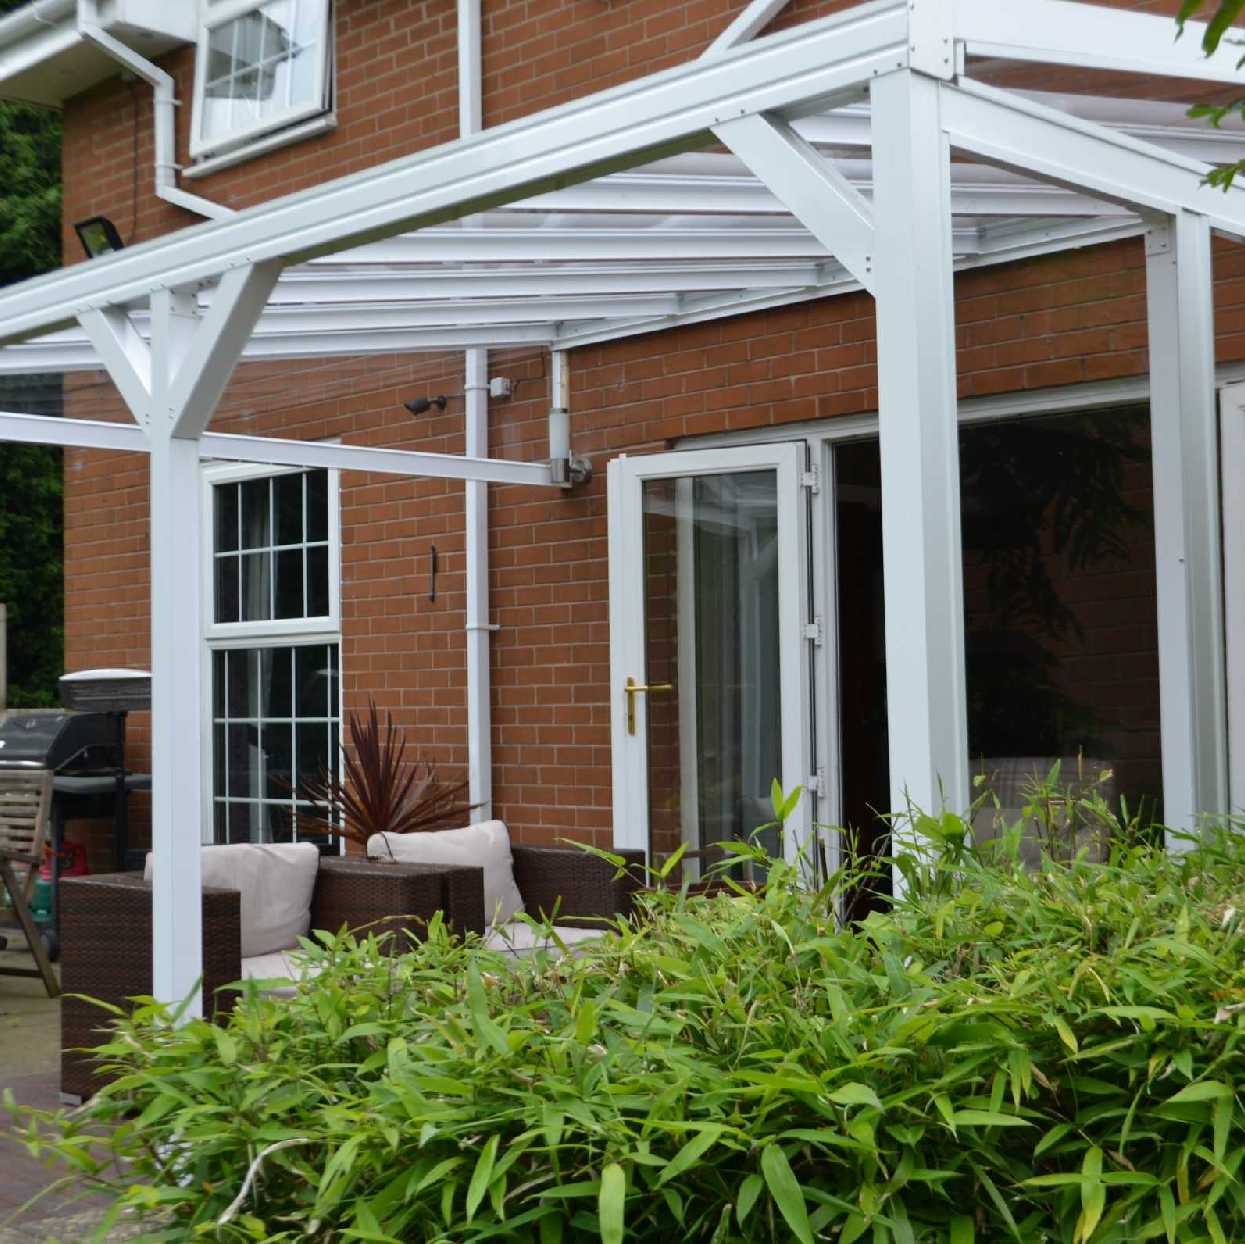 Omega Smart Lean-To Canopy, White with 6mm Glass Clear Plate Polycarbonate Glazing - 7.0m (W) x 2.5m (P), (4) Supporting Posts from Omega Build